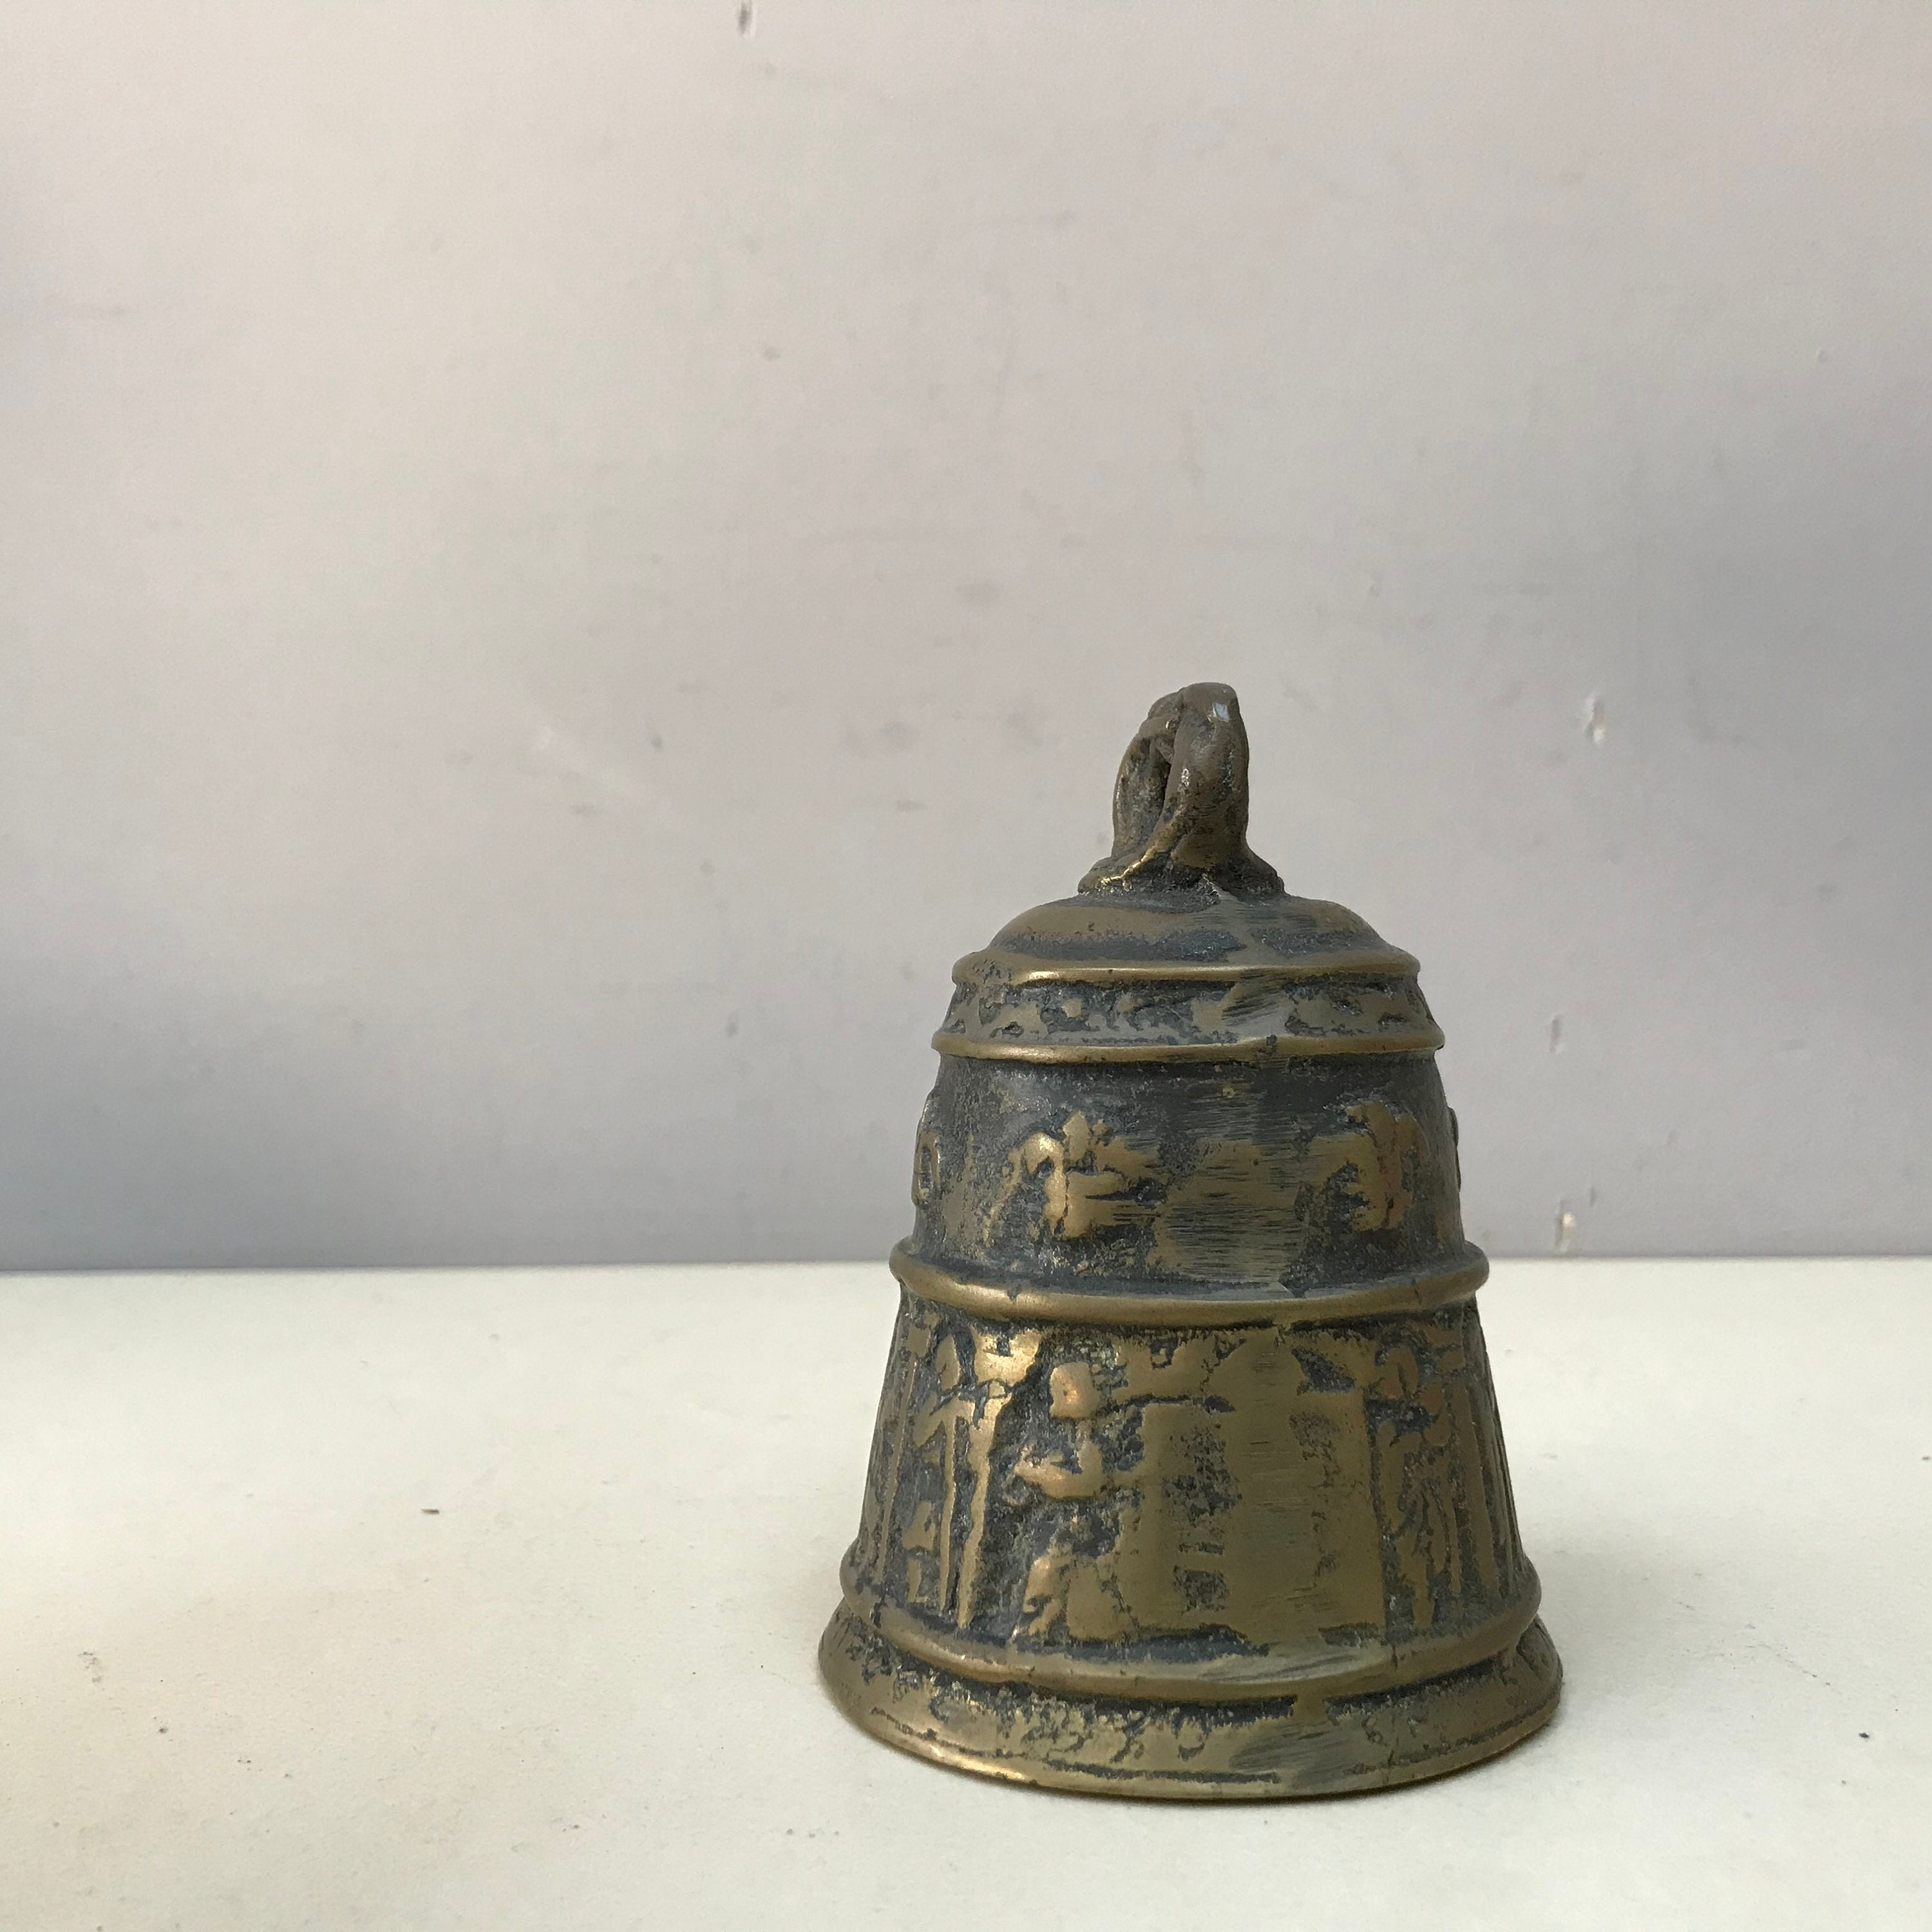 Antique Primitive Heavy Bronze Bell With Coats of Arms and | Etsy